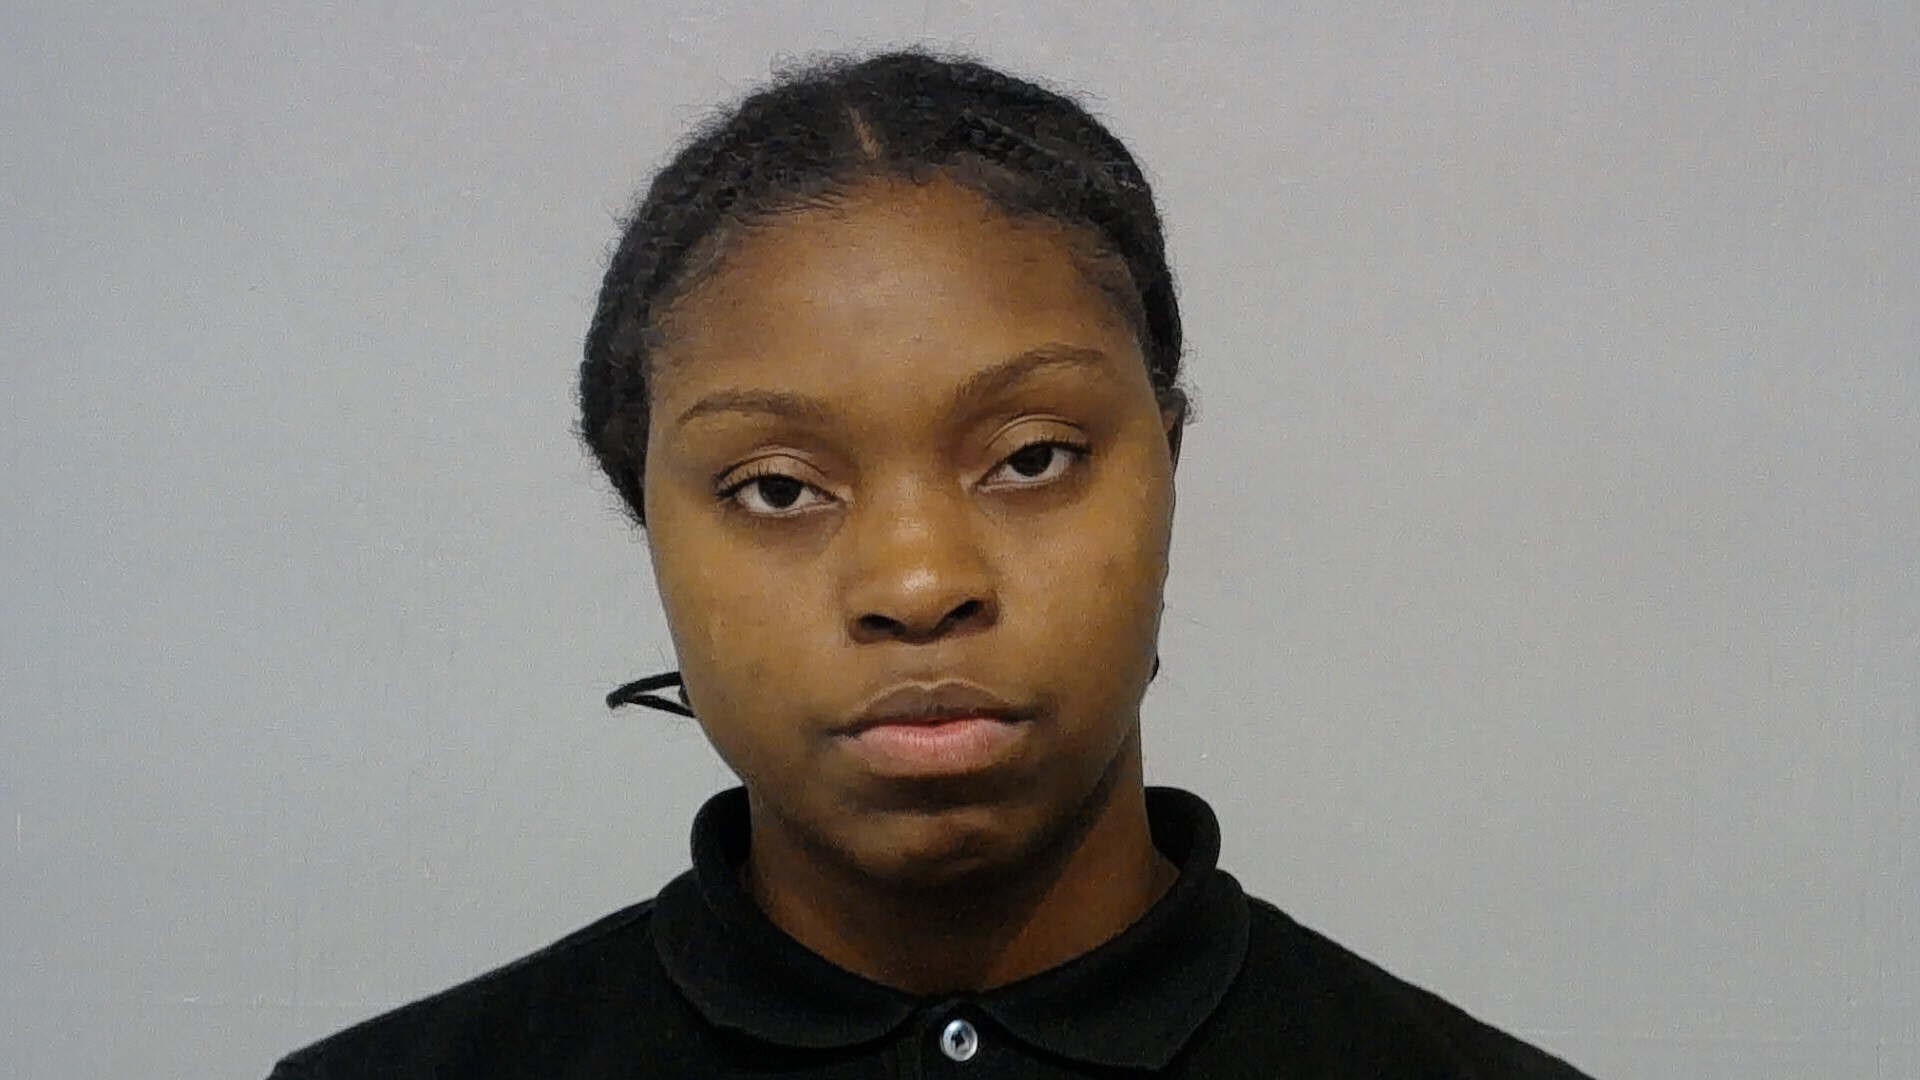 Briana Sharnerica Pitts was arrested Wednesday for allegedly bringing contraband, including marijuana and cell phones, into the jail when she reported to work.